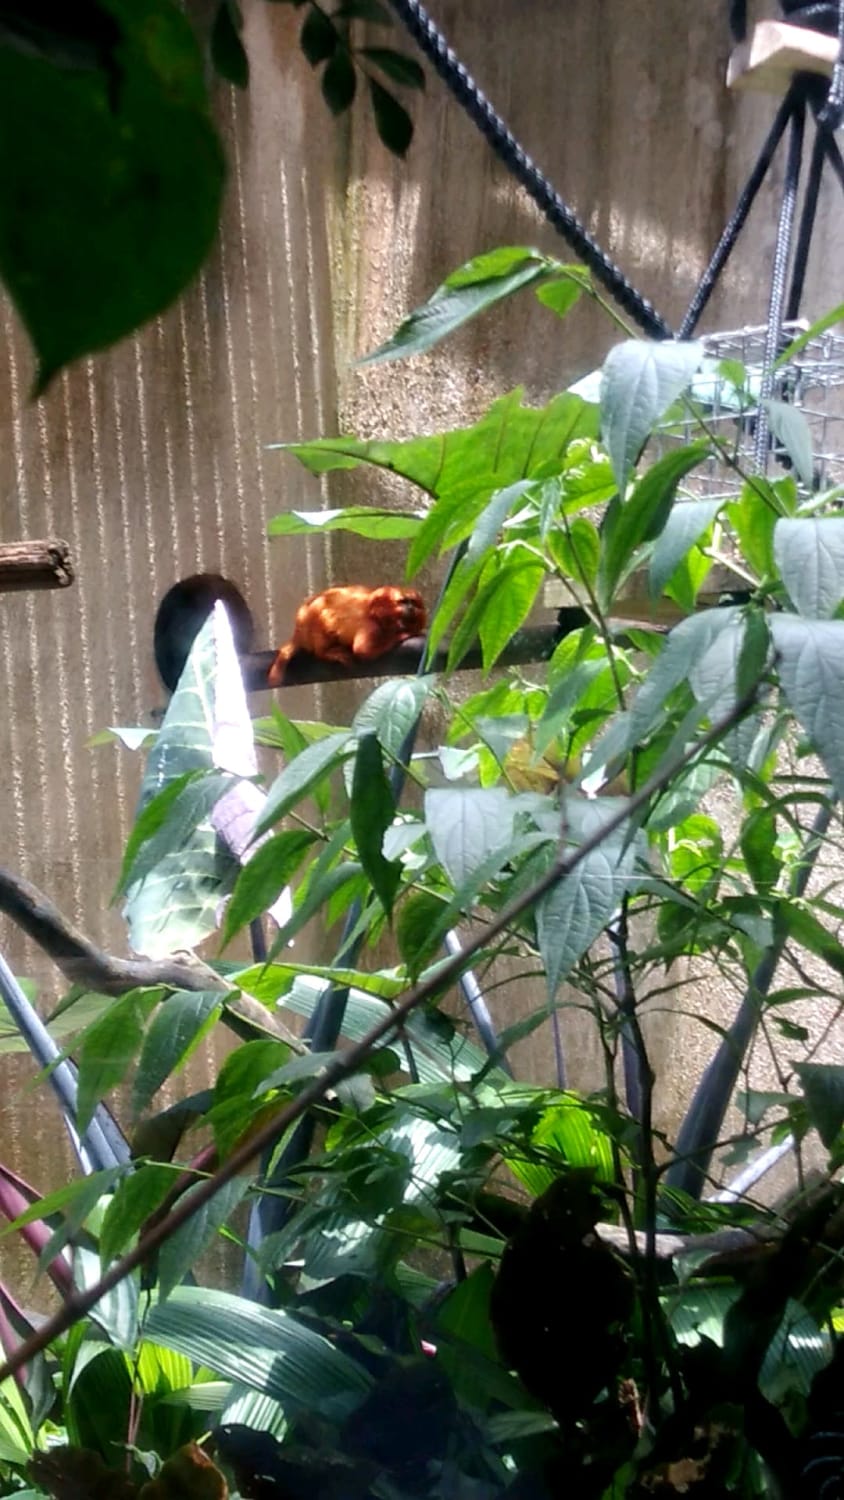 Golden lion tamarin chilling. The species is one of the rarest on the planet, almost extinct to be trafficked as a pet or for its metallic like golden fur to become a scarf. Brazilian species